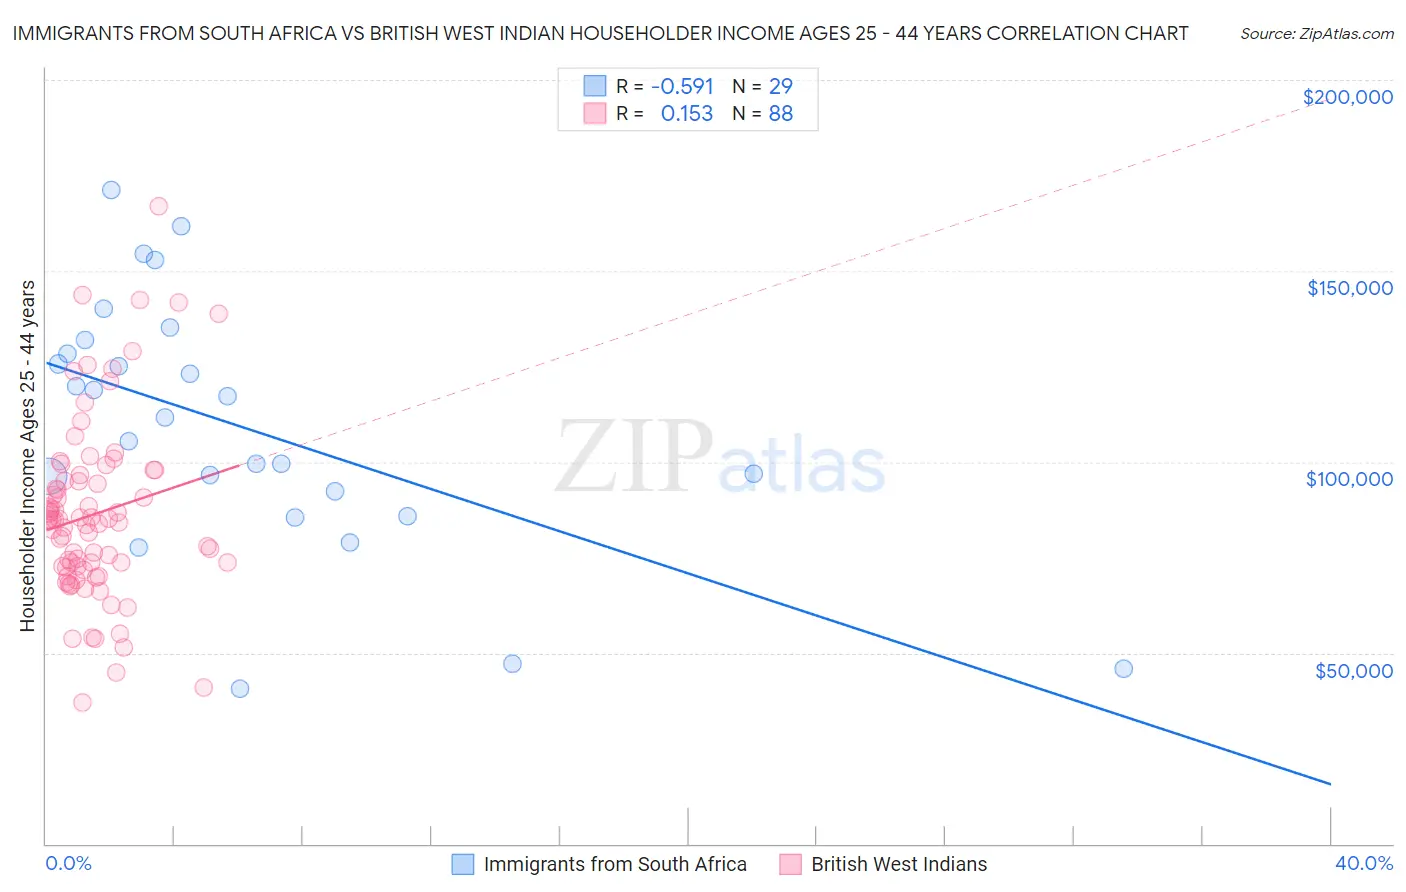 Immigrants from South Africa vs British West Indian Householder Income Ages 25 - 44 years